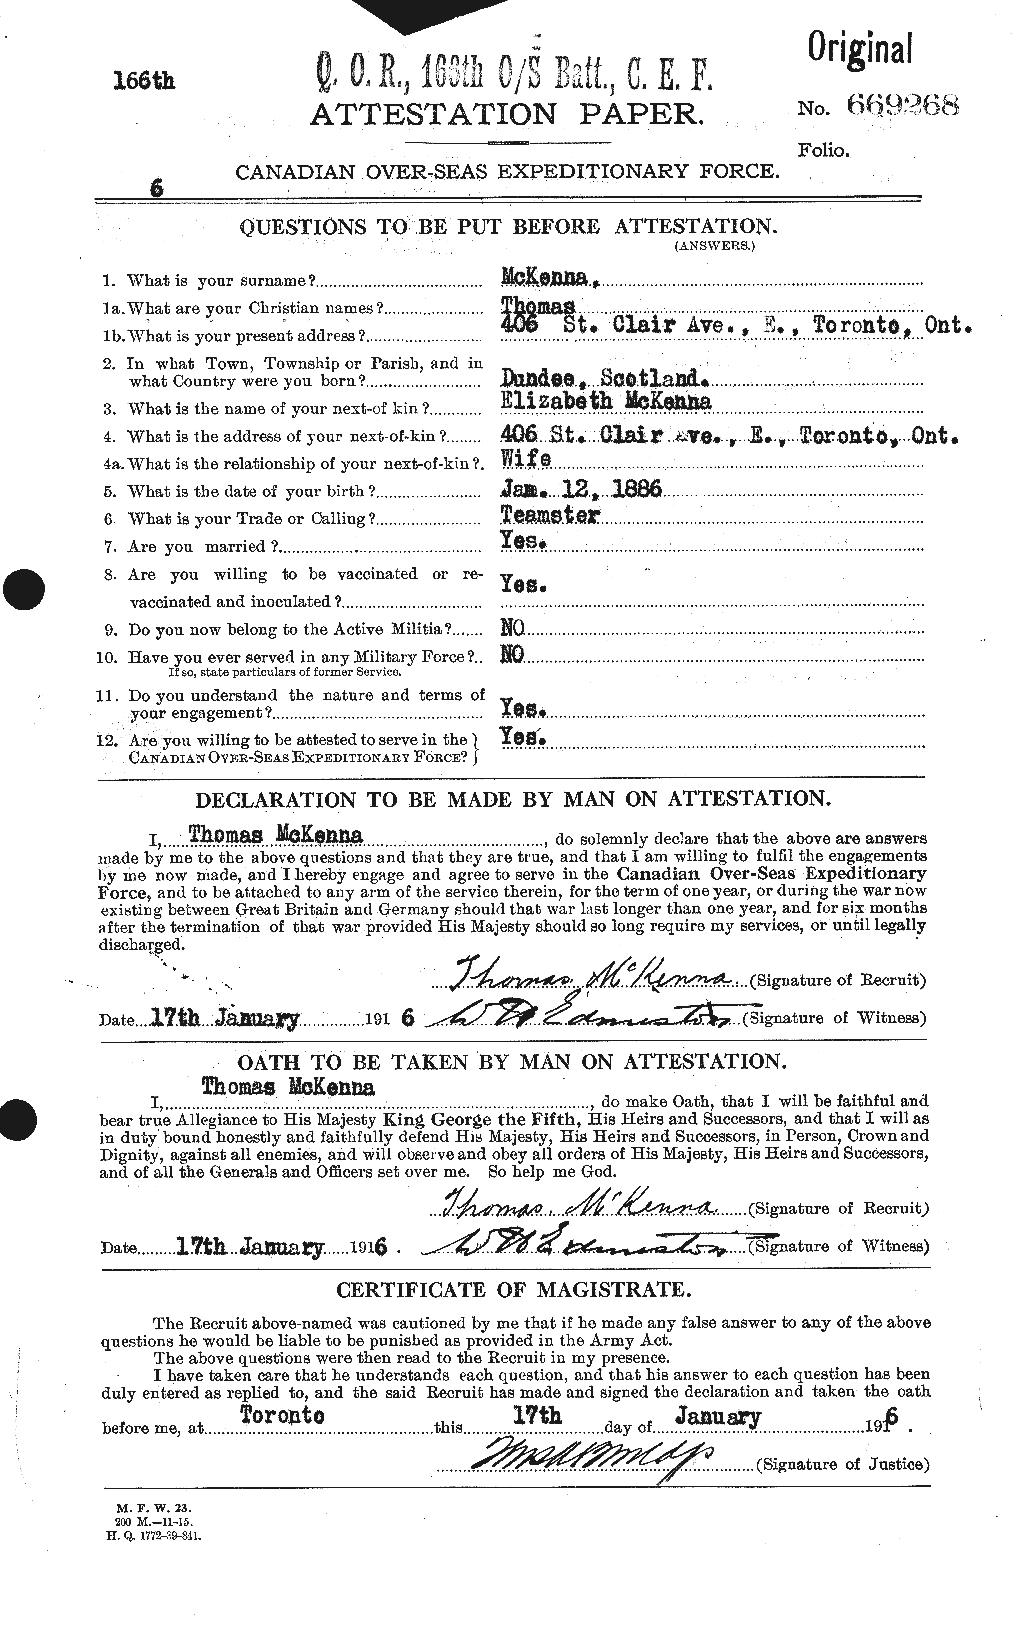 Personnel Records of the First World War - CEF 528663a